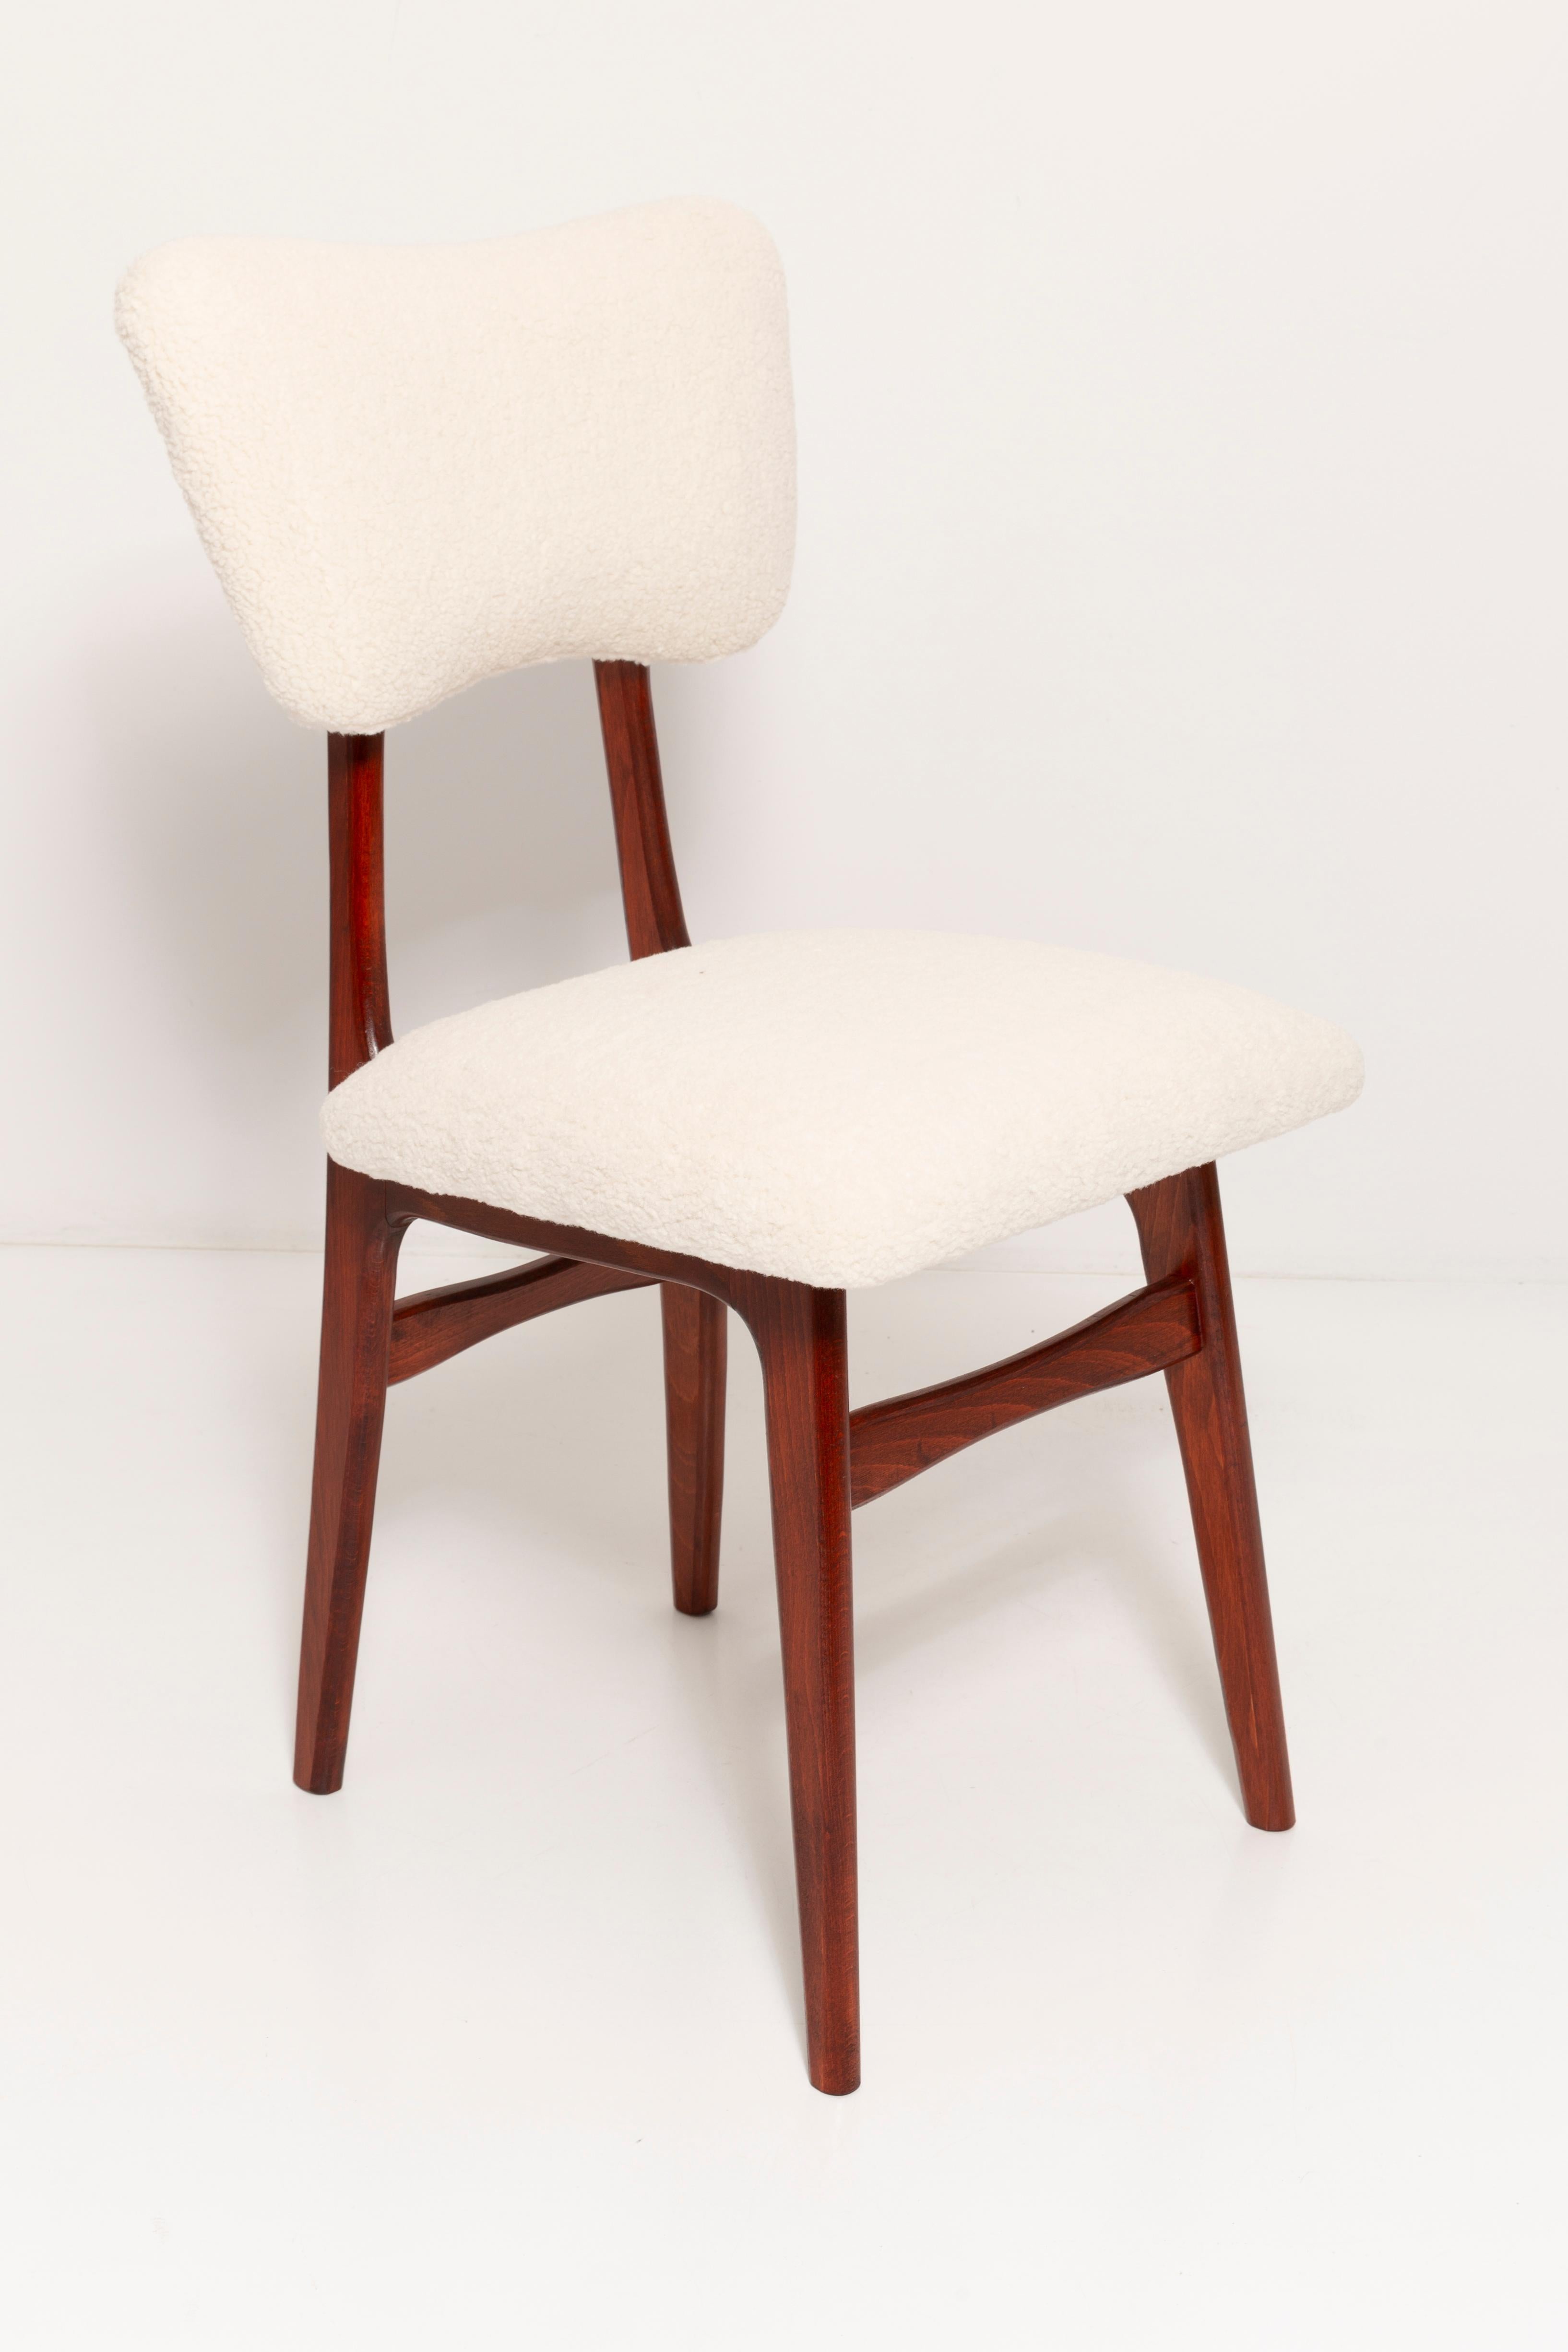 Chairs designed by Prof. Rajmund Halas. Made of beechwood. Chair is after a complete upholstery renovation; the woodwork has been refreshed and painted in cherry lacquer. Seat and back is dressed in crème, durable and pleasant to the touch bouclé